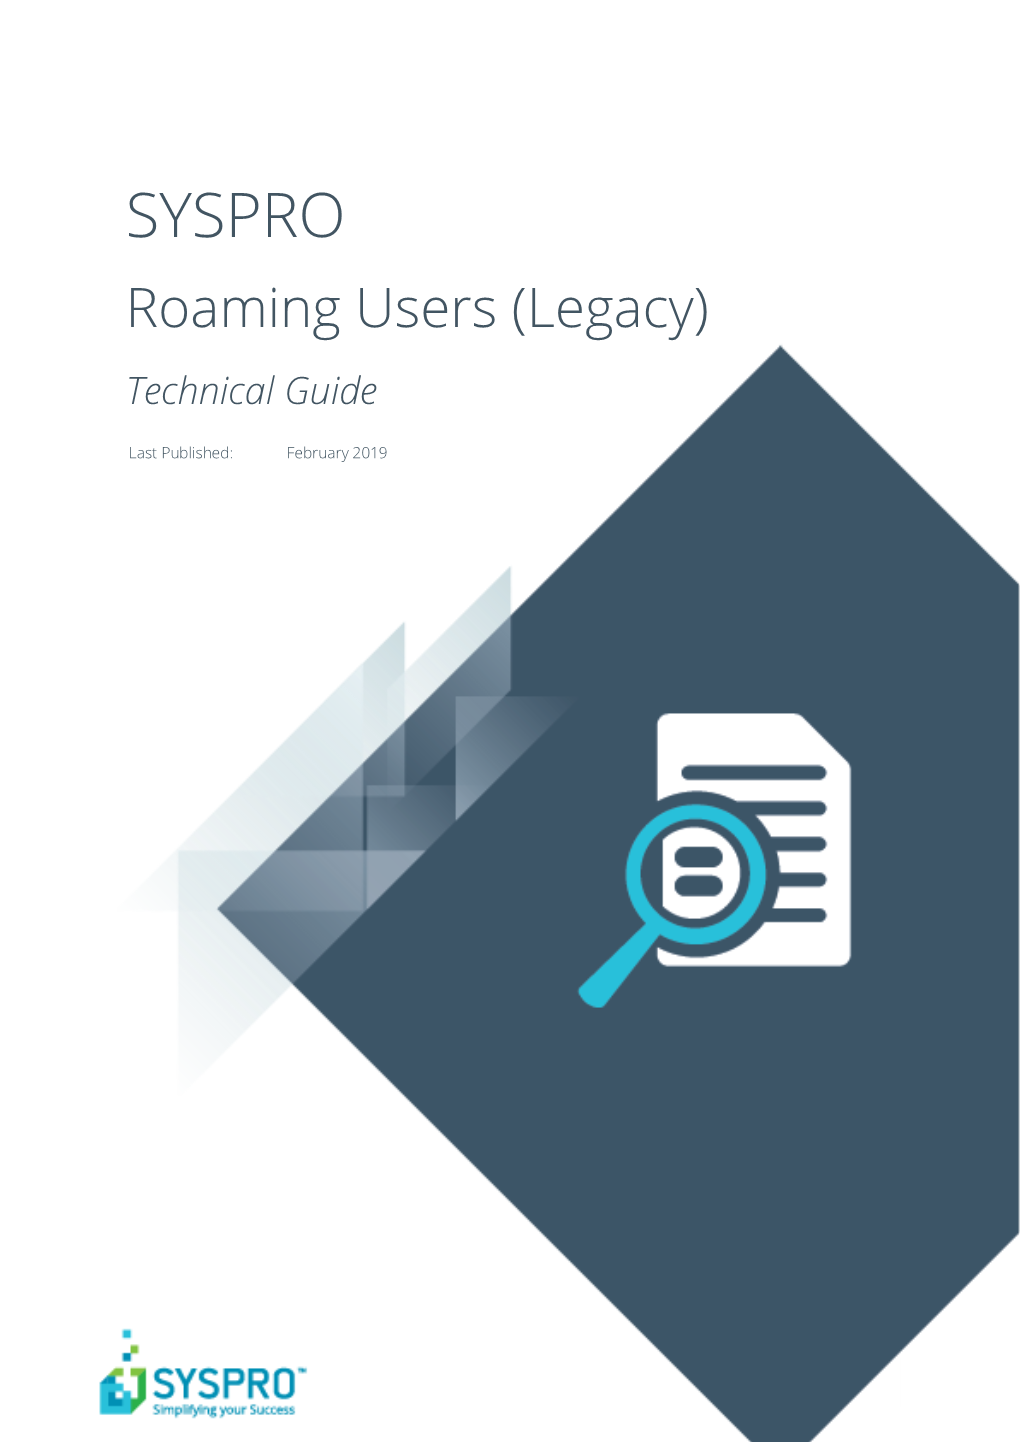 SYSPRO 8 - Roaming Users (Legacy) 1 © SYSPRO